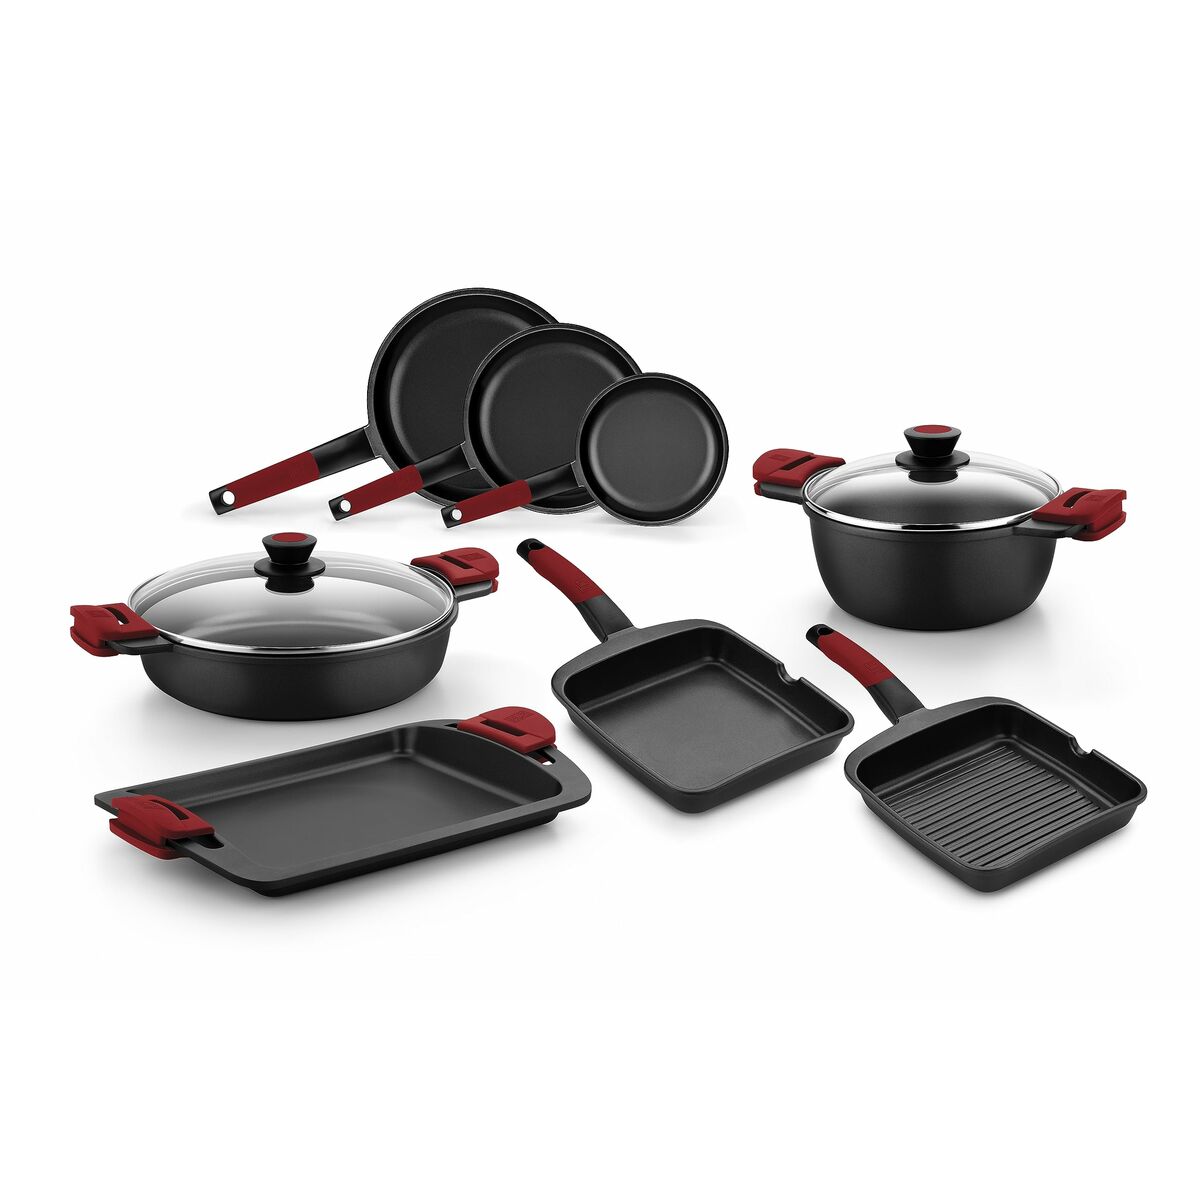 Non-stick frying pan BRA A411228 Black Red Stainless steel Aluminium